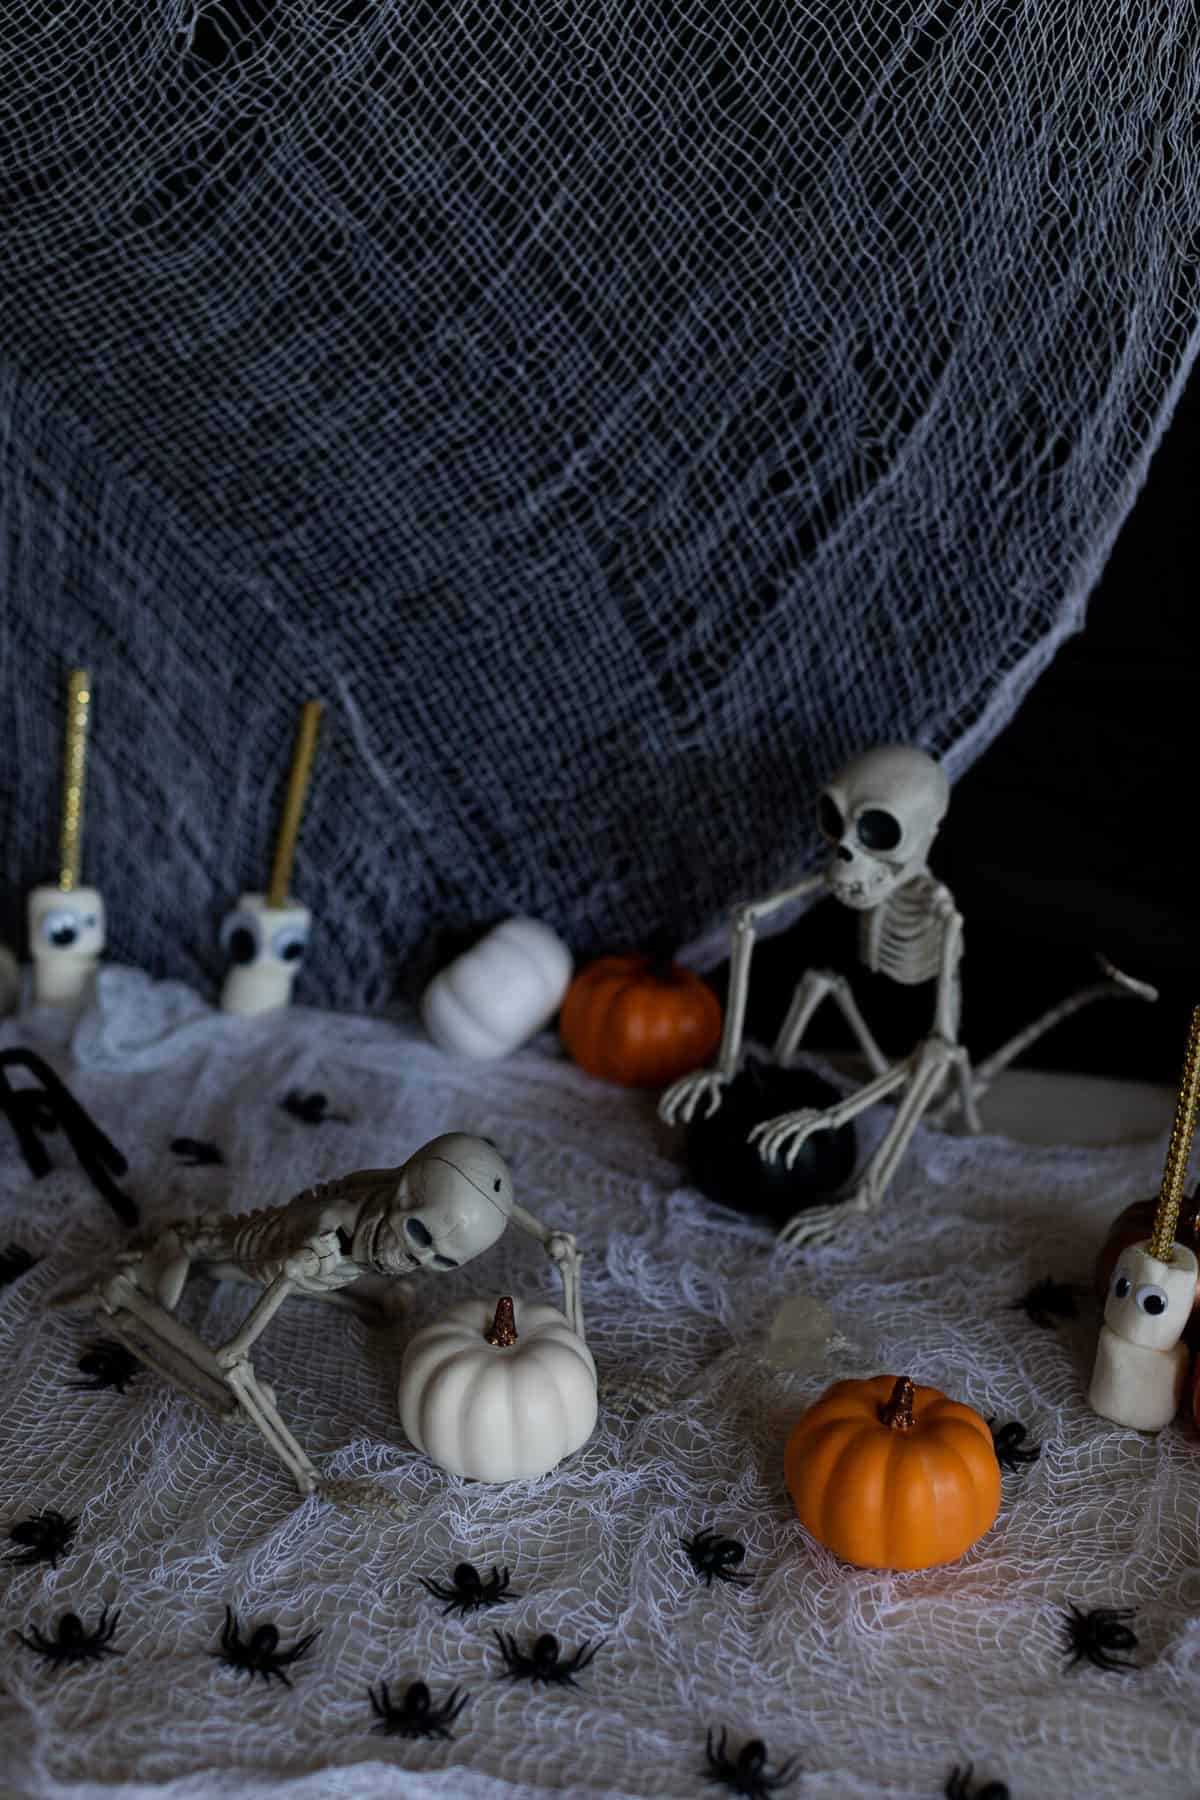 Skeletons, pumpkins, and spiders on a table.